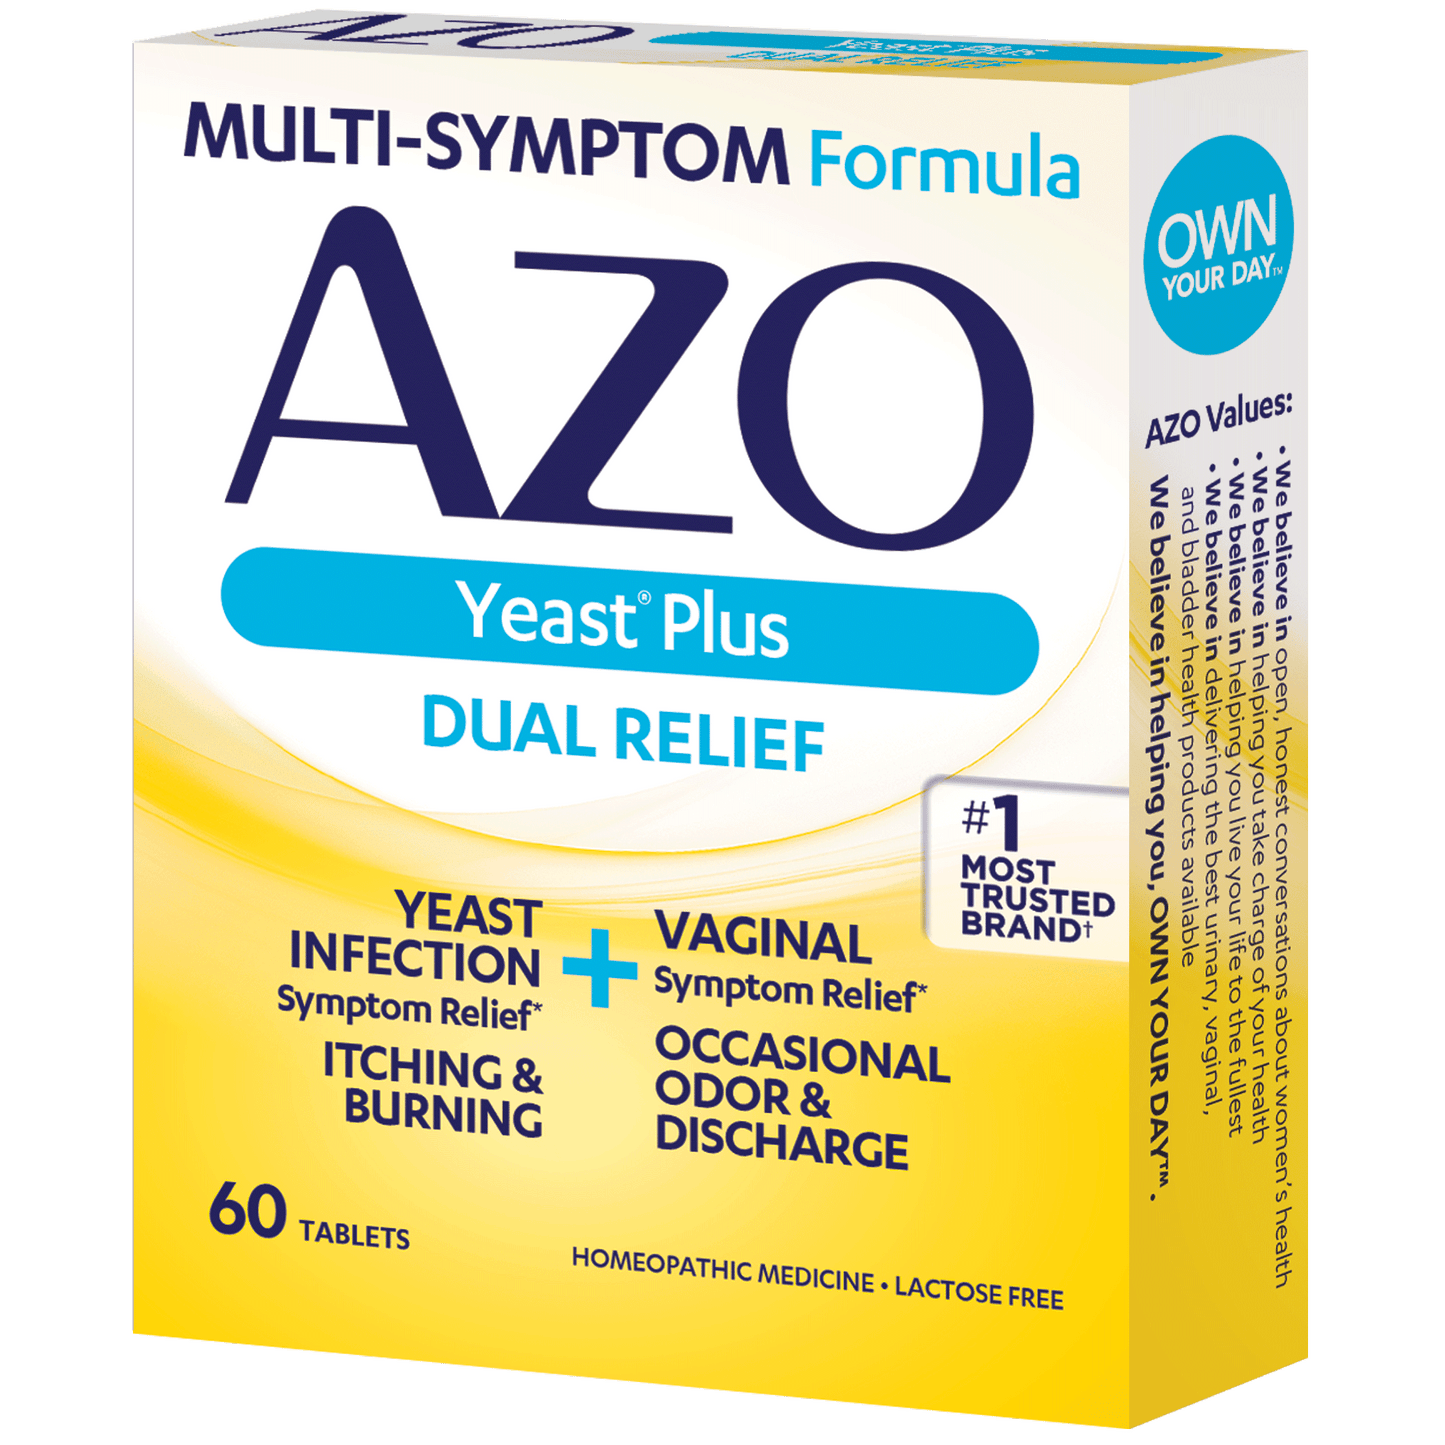 AZO Yeast Plus Dual Relief, Yeast Infection,Vaginal Symptom Relief, 60 Count